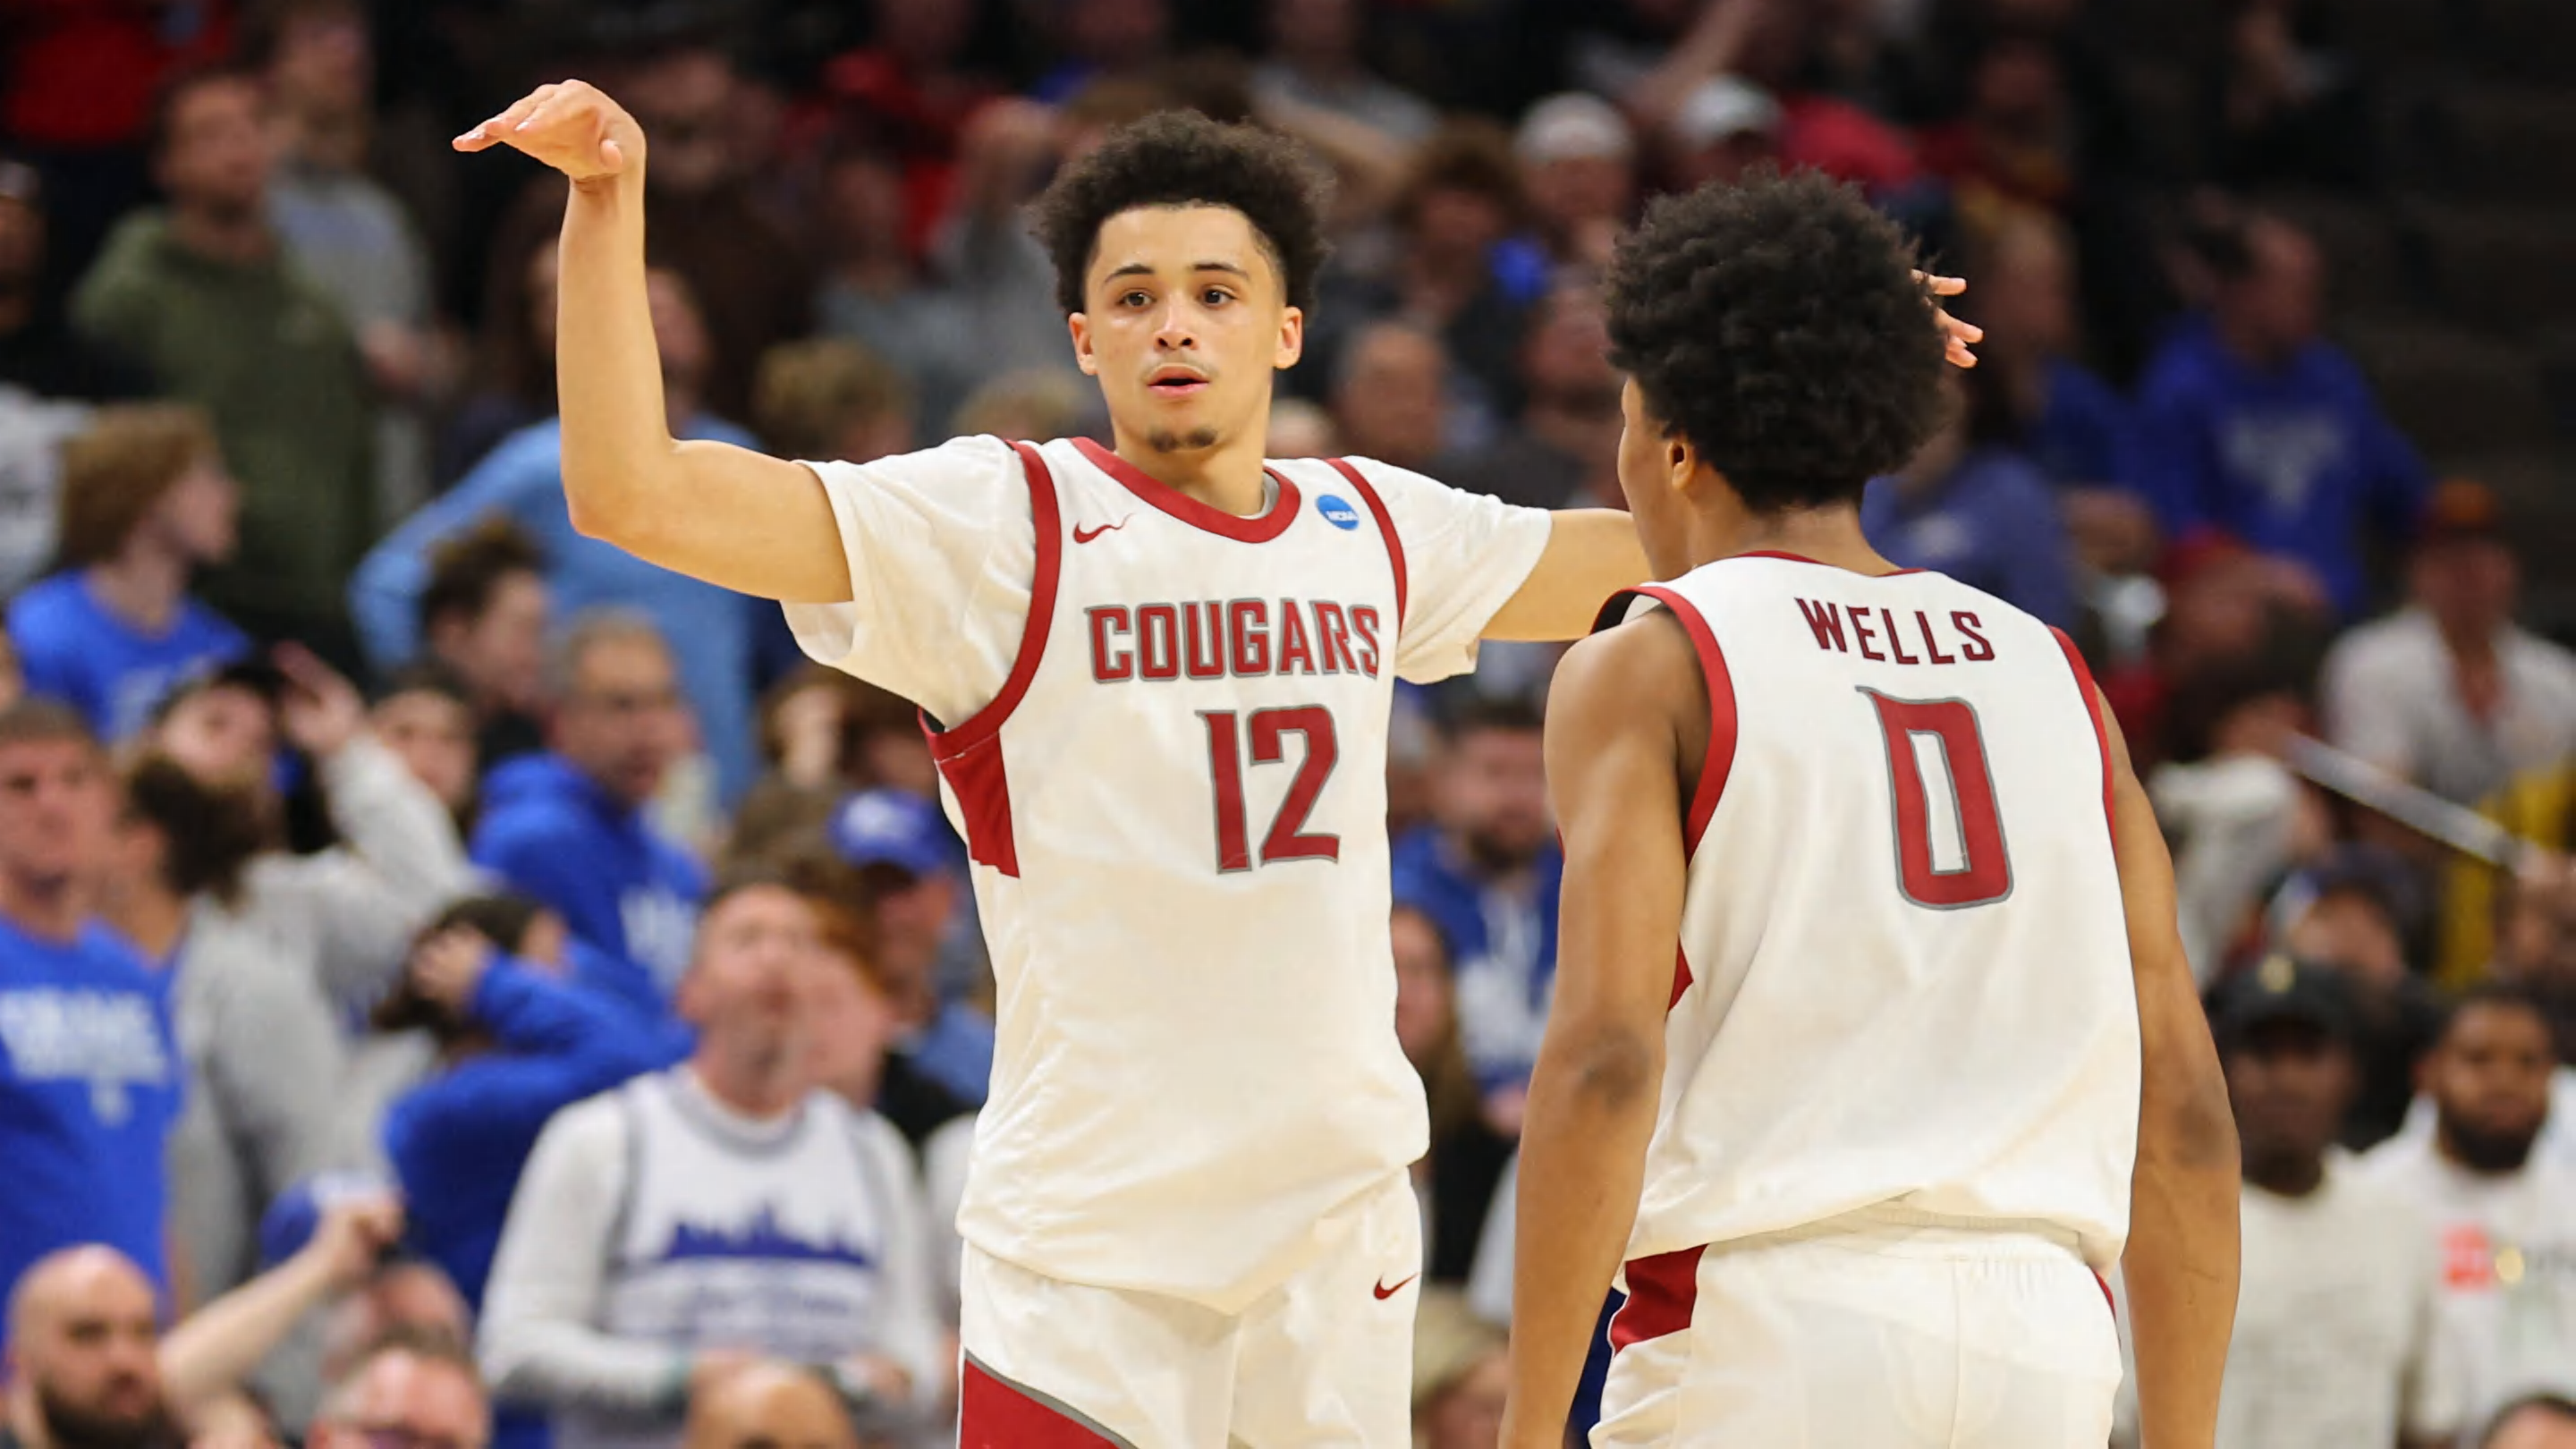 Washington State survives upset bid from Drake in a March Madness thriller